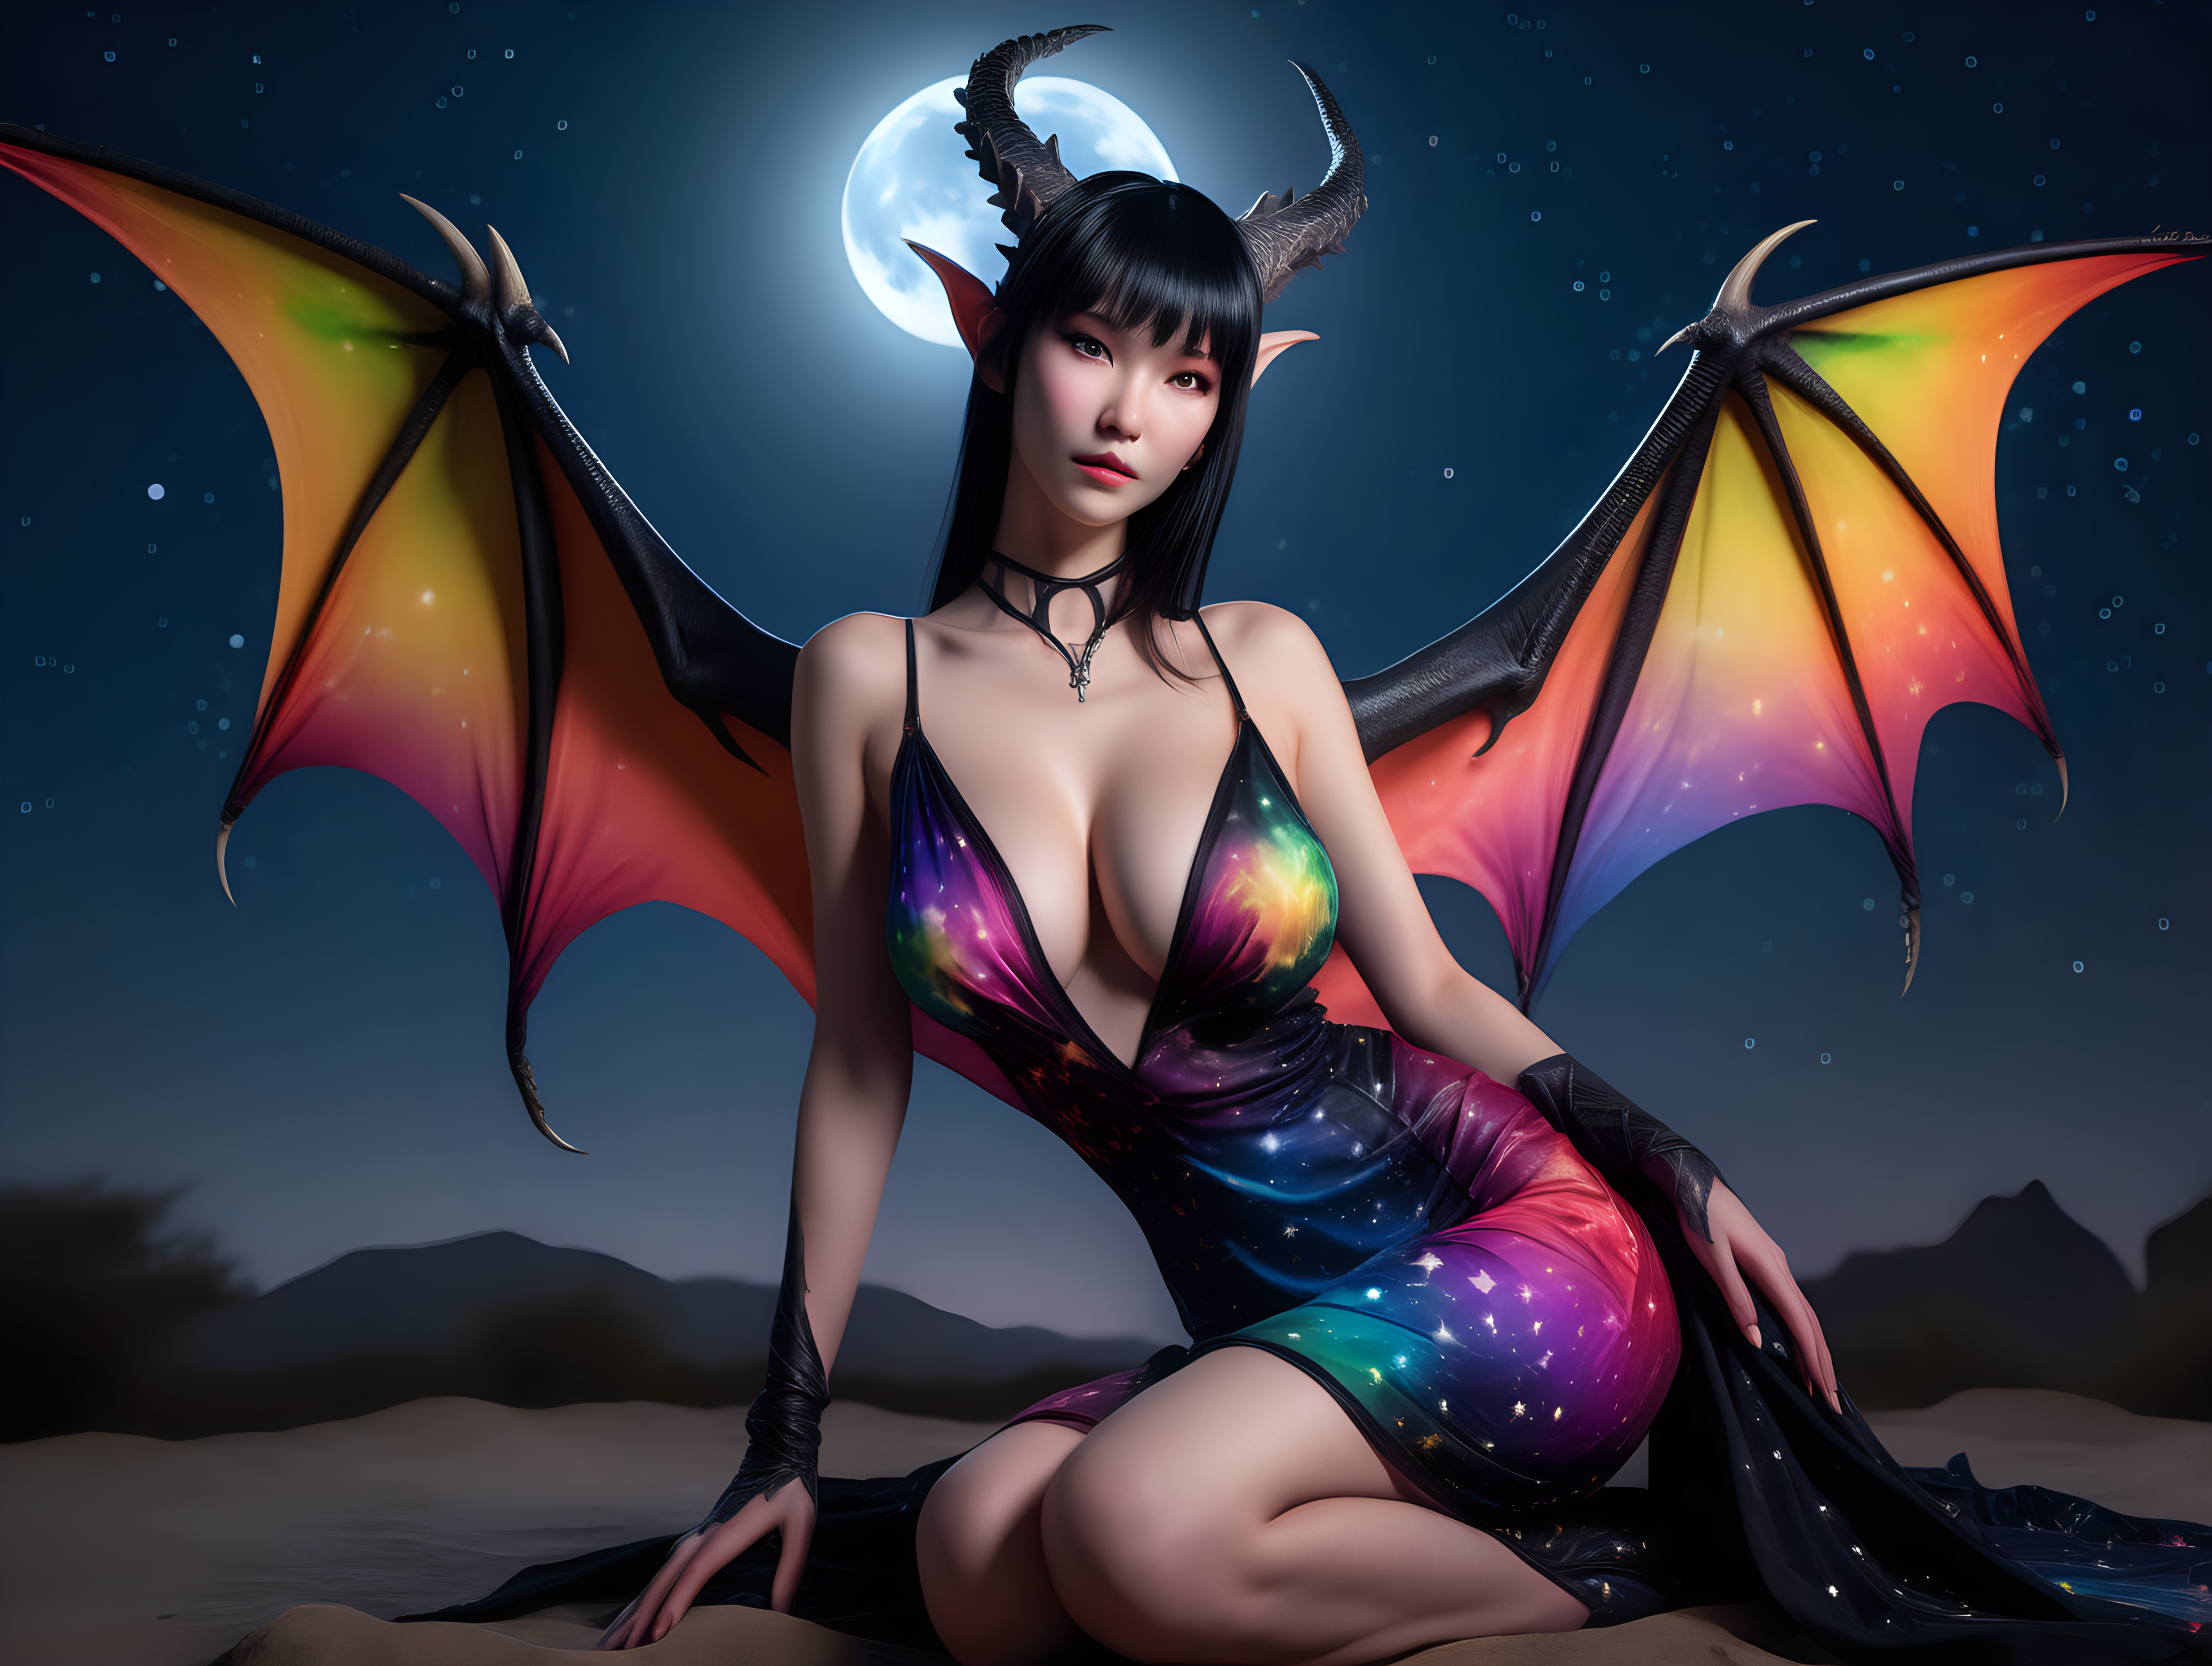 ultra-realistic high resolution and highly detailed close up adult film photoshoot of a slender female human dragon, with sleek pointy black horns gently swept straight backwards over head, draconic markings on arms and body, with massive breasts, colourful open front loose transparent dress, sitting under a starry sky with the moon in the background, looking at the camera